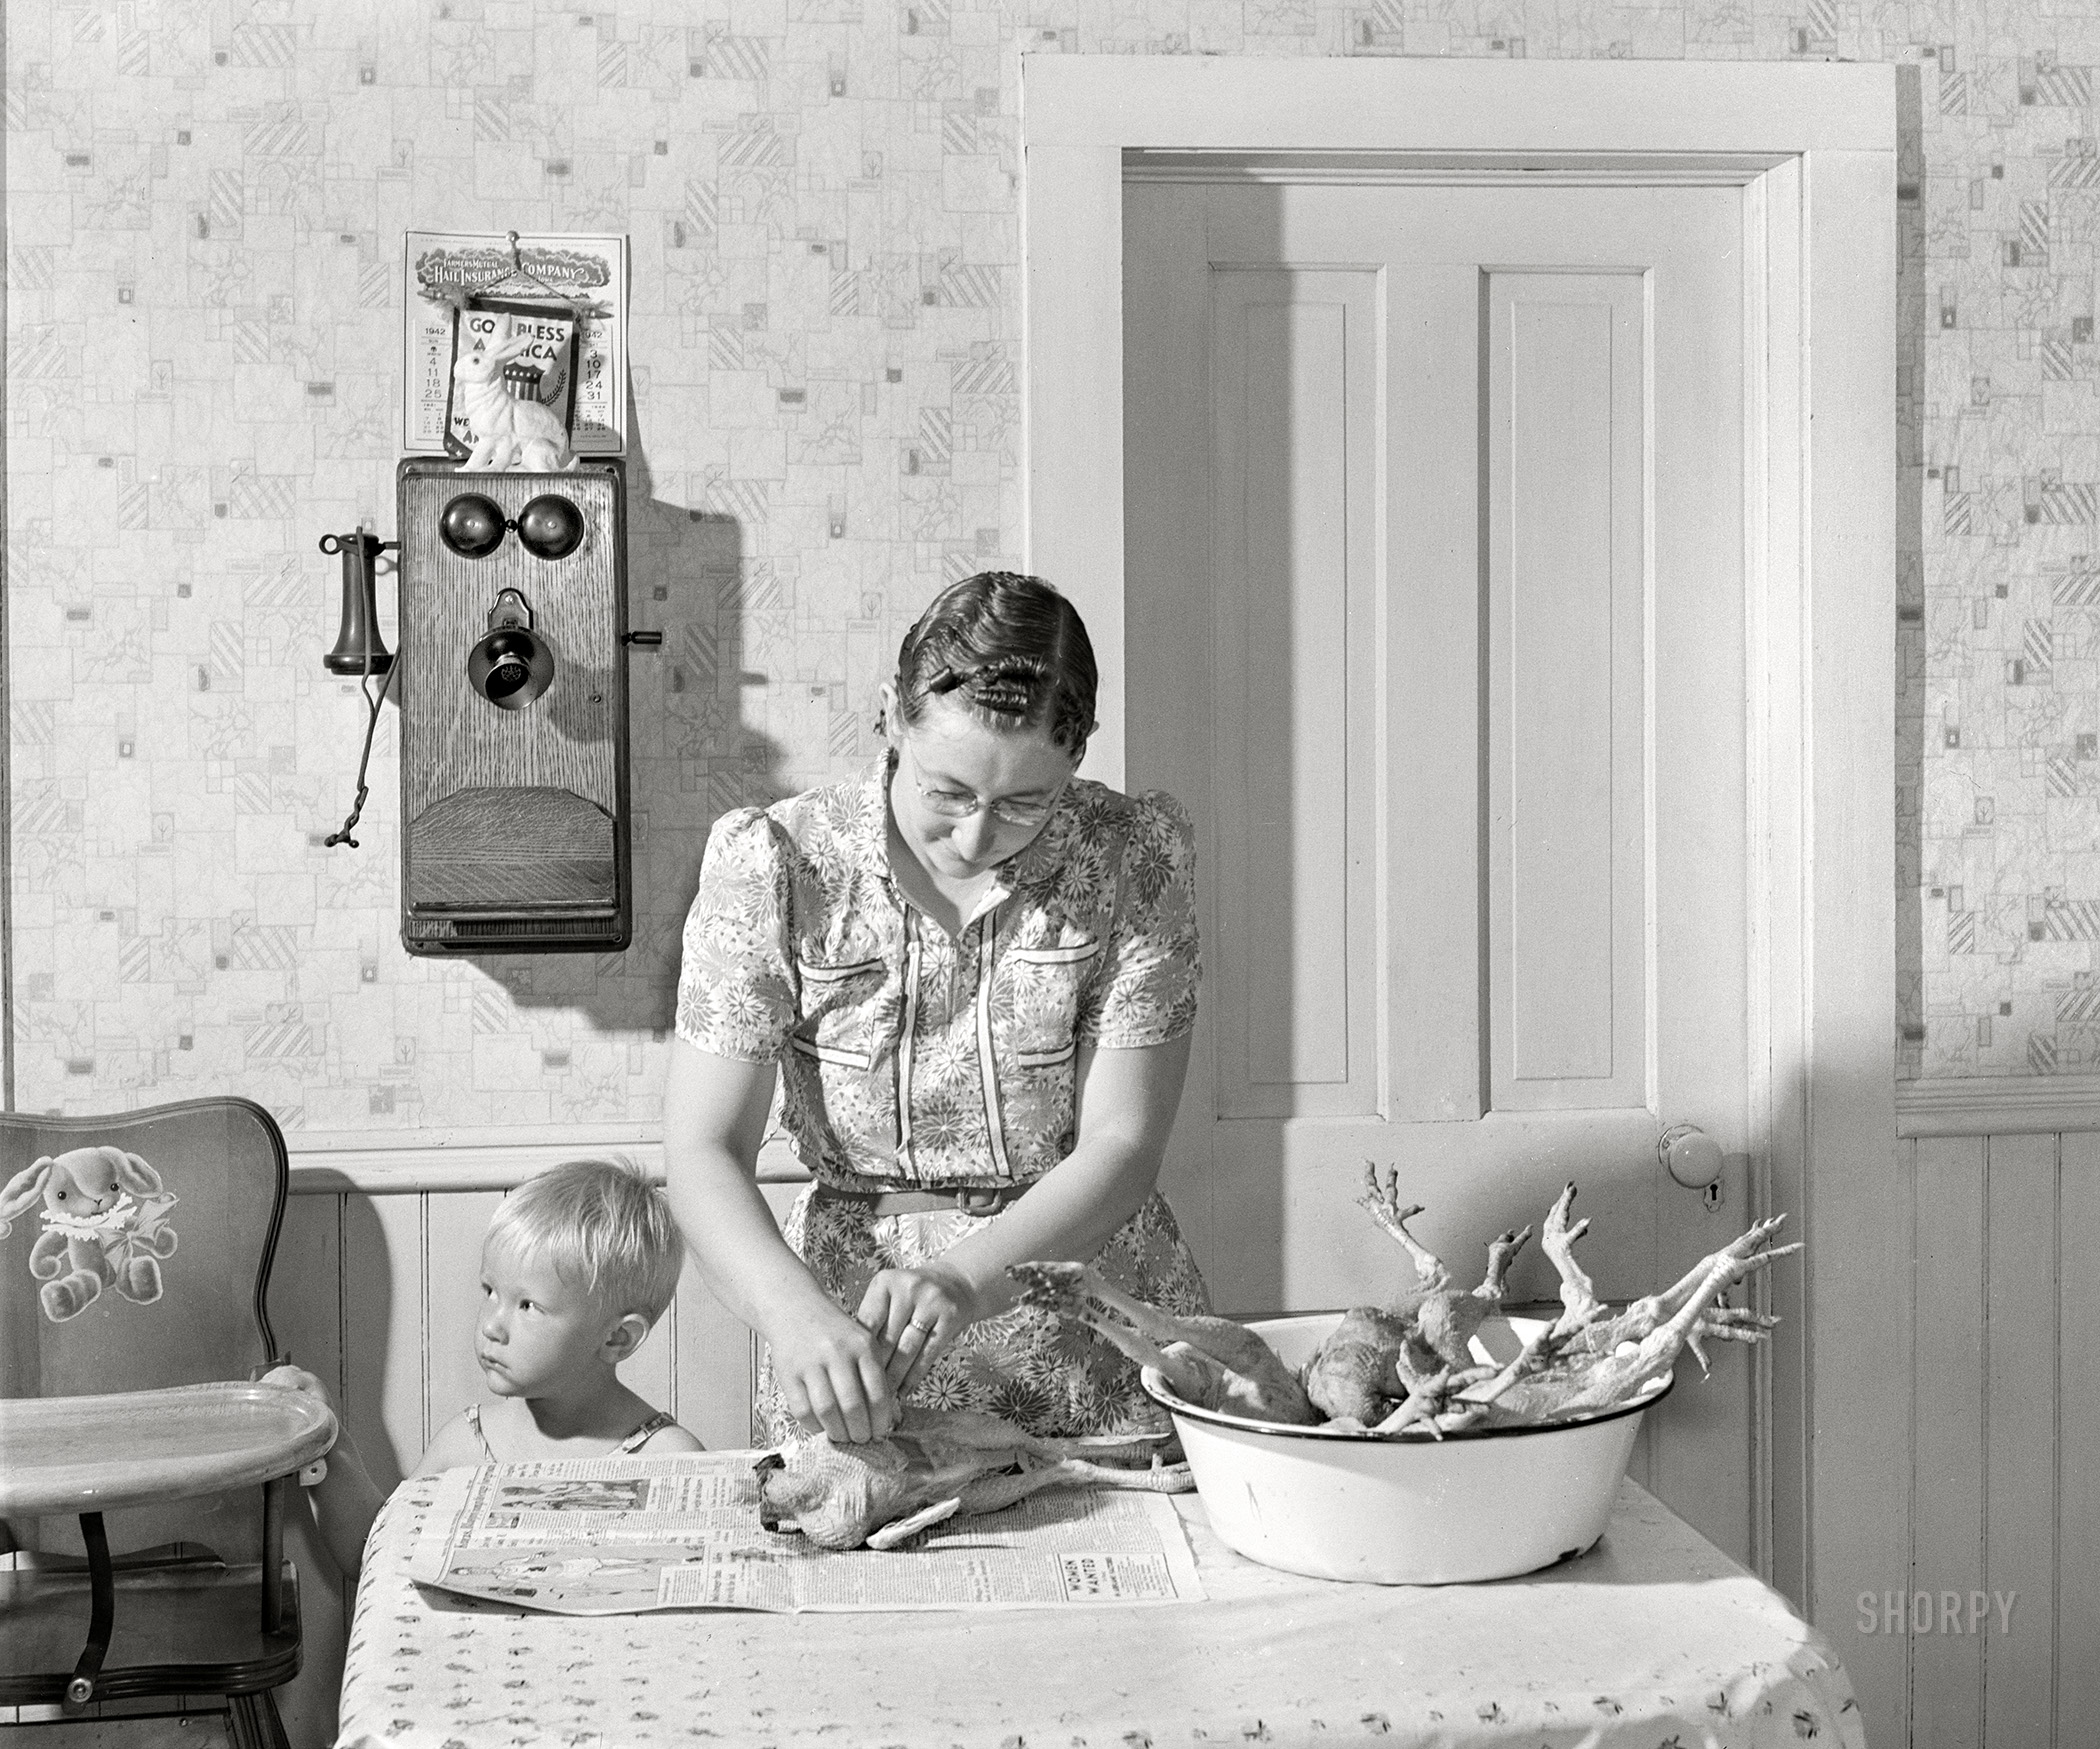 May 1942. "Lancaster County, Nebraska. Mrs. Lynn May, FSA borrower, cleaning a chicken." Acetate negative by John Vachon for the Farm Security Administration. View full size.